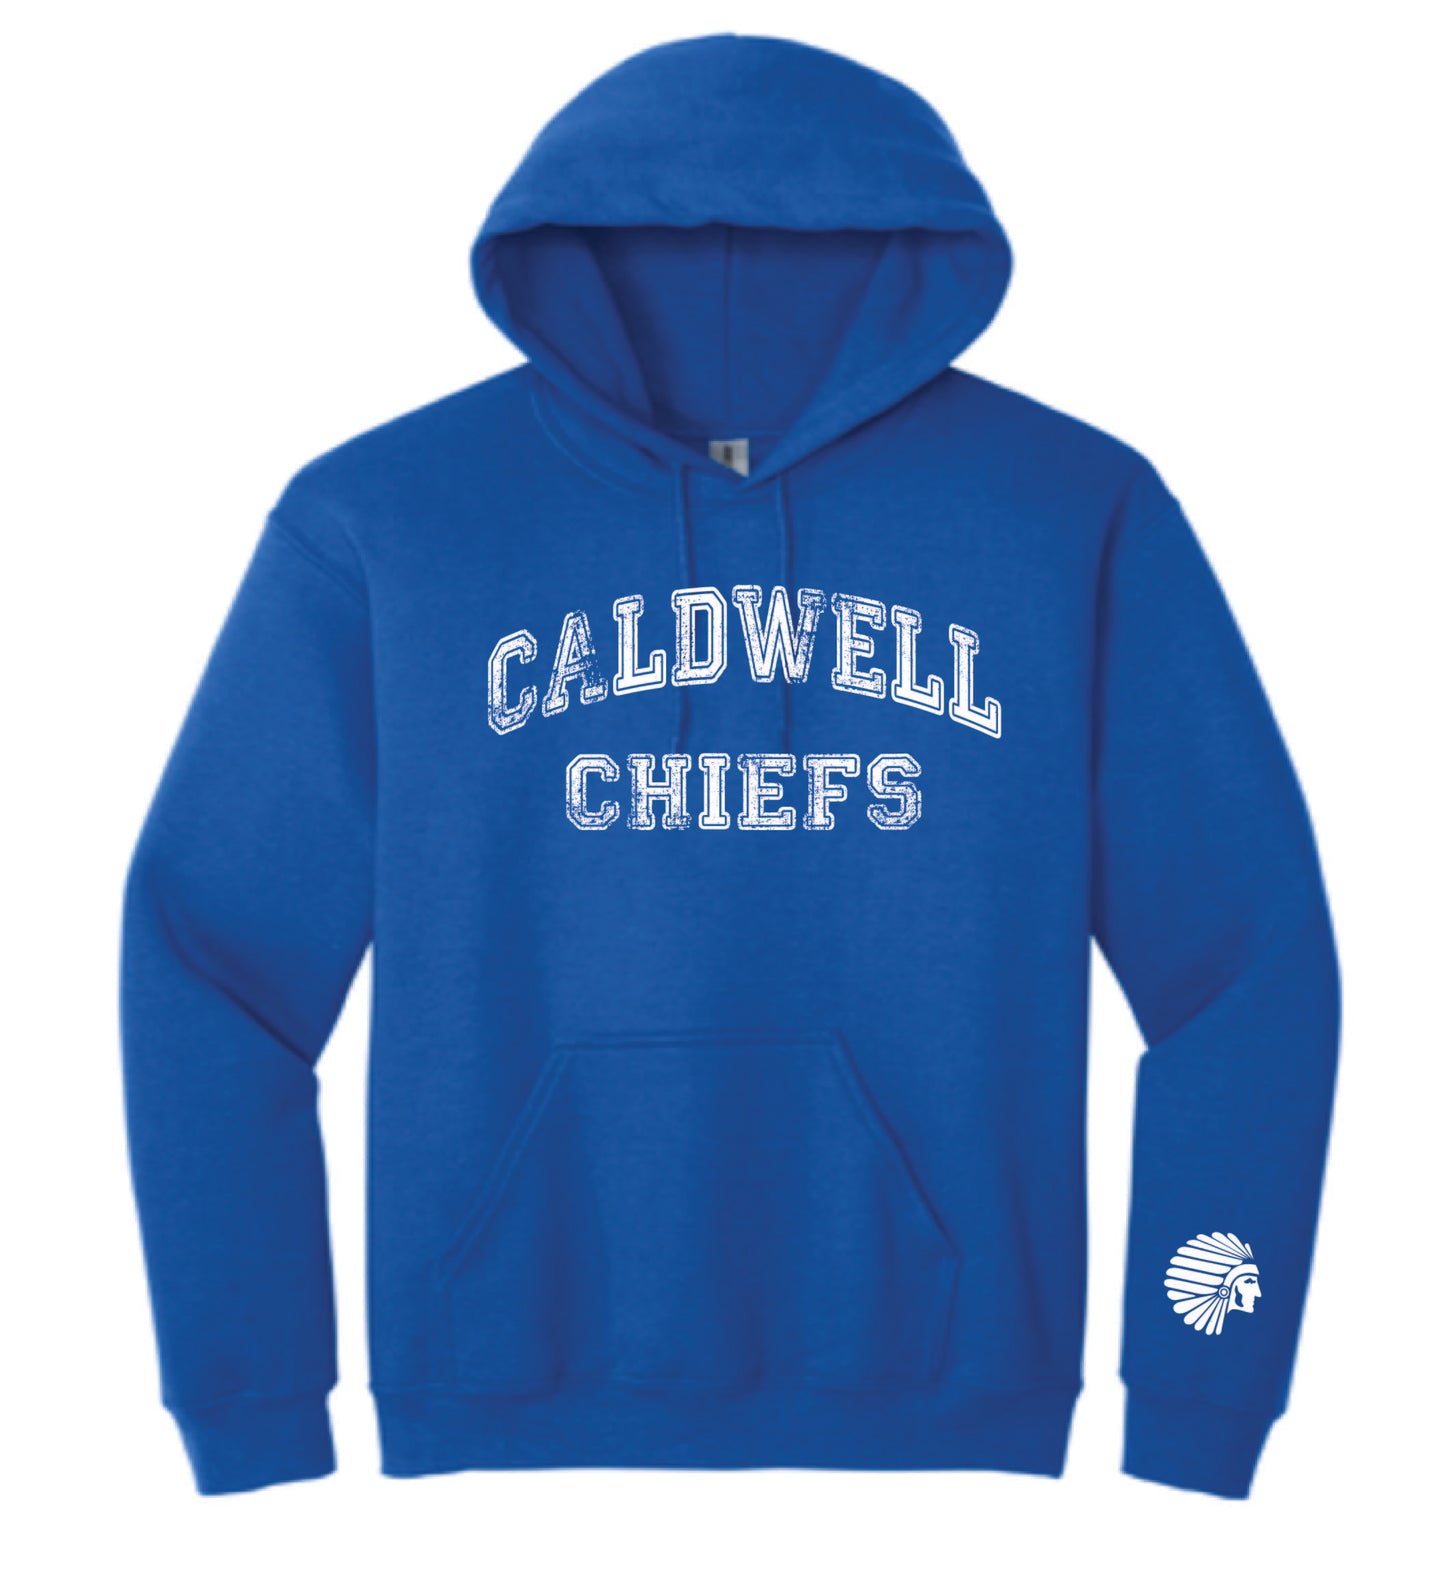 youth caldwell chiefs hoodie blue